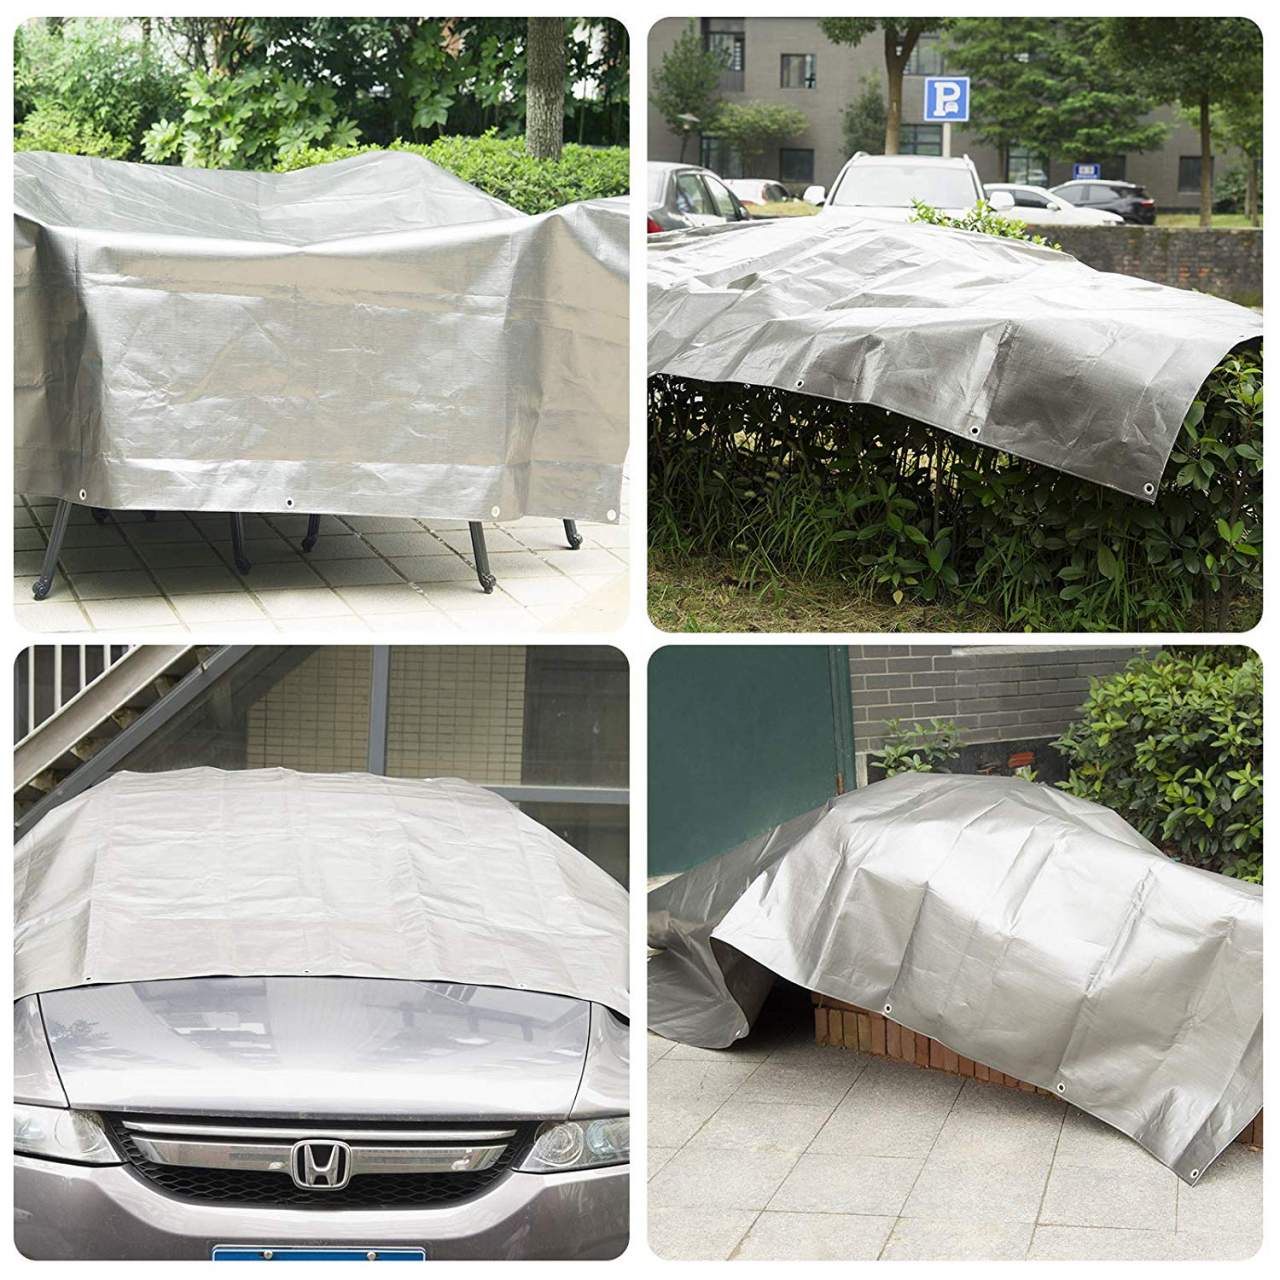 Roof Cover and Much More High Quality Made in Europe Durable Tarpaulin Waterproof with Eyelets for Covering Garden Furniture 150G / Metre Squared Heavy Duty Tarp White Camping 2x3 